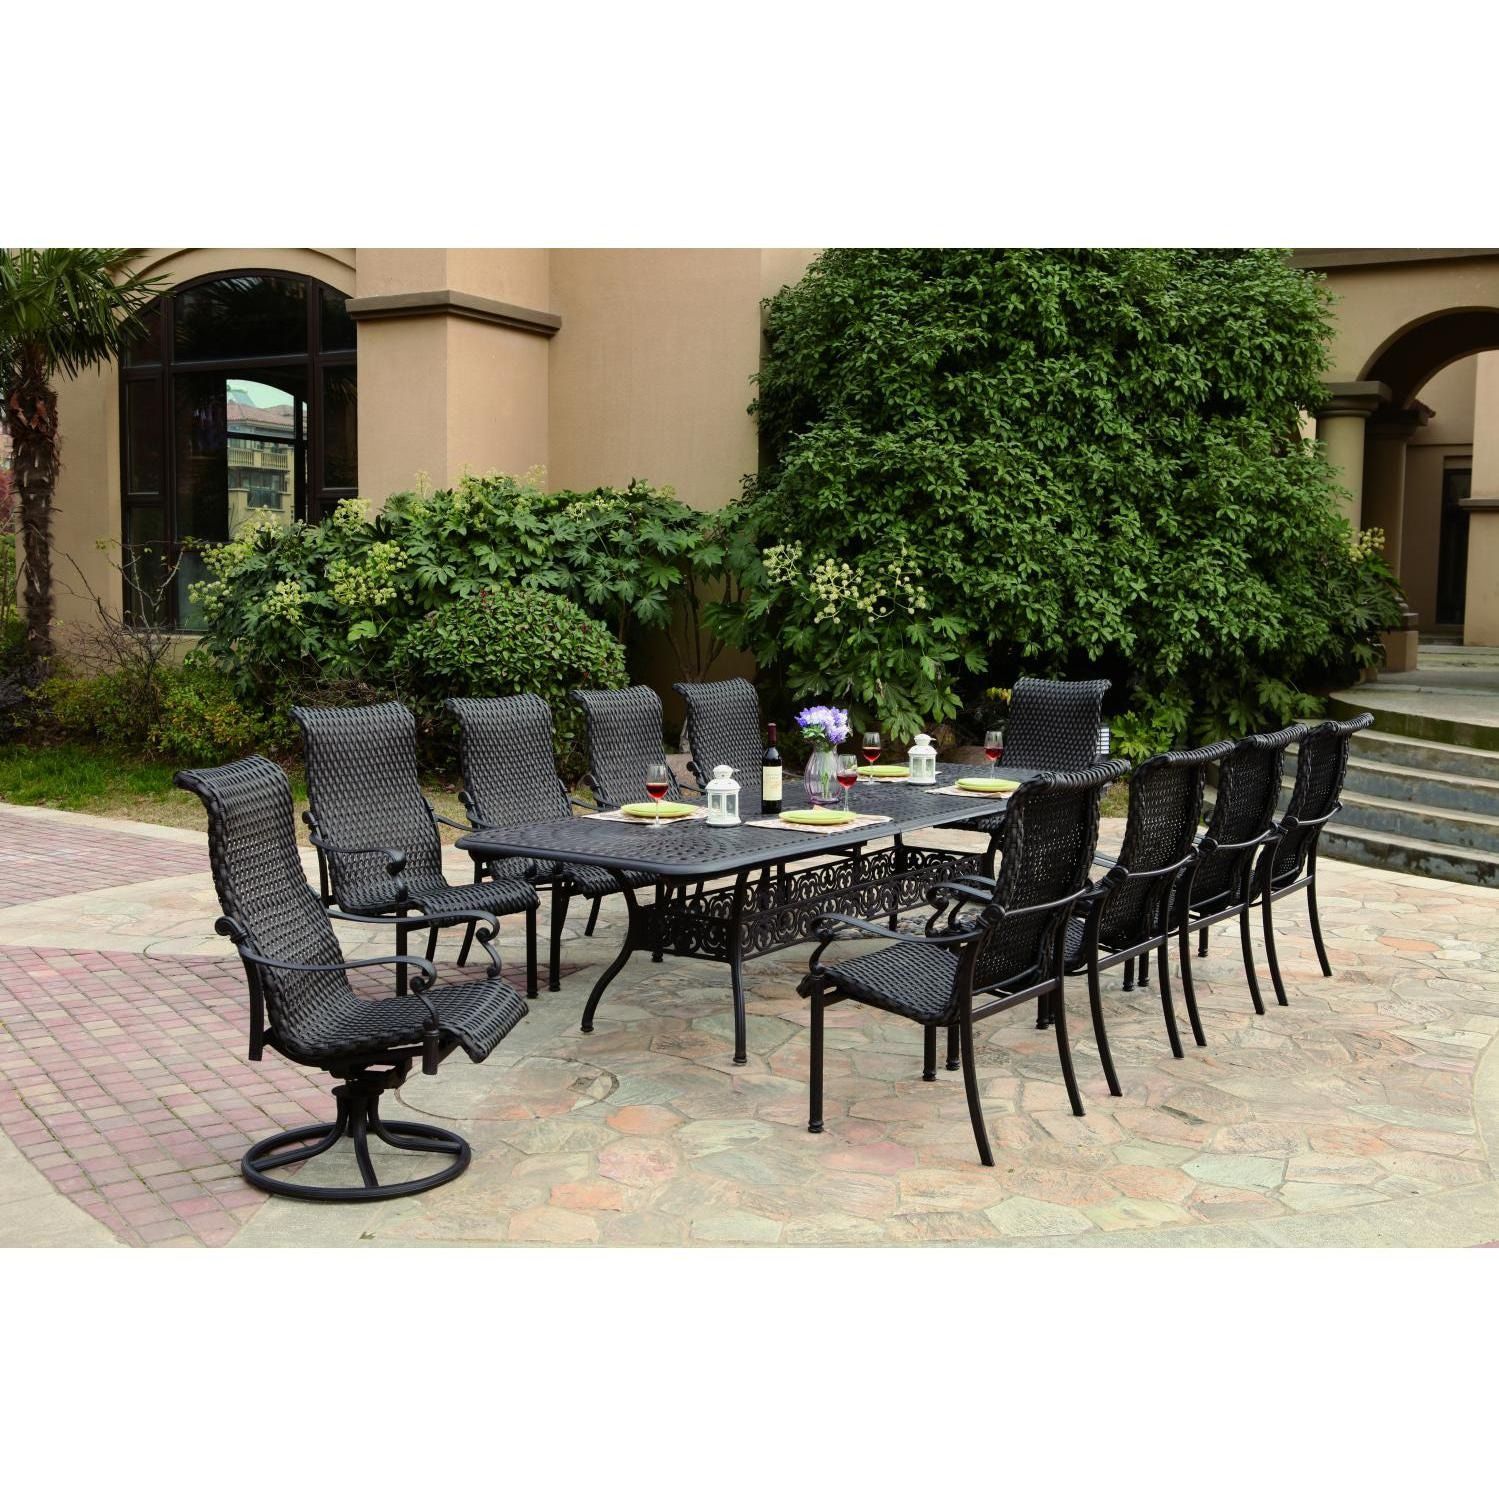 Victoria 11 Piece Resin Wicker Patio Dining Set W/ 92 X 42 Inch Throughout Large Rectangular Patio Dining Sets (View 12 of 15)